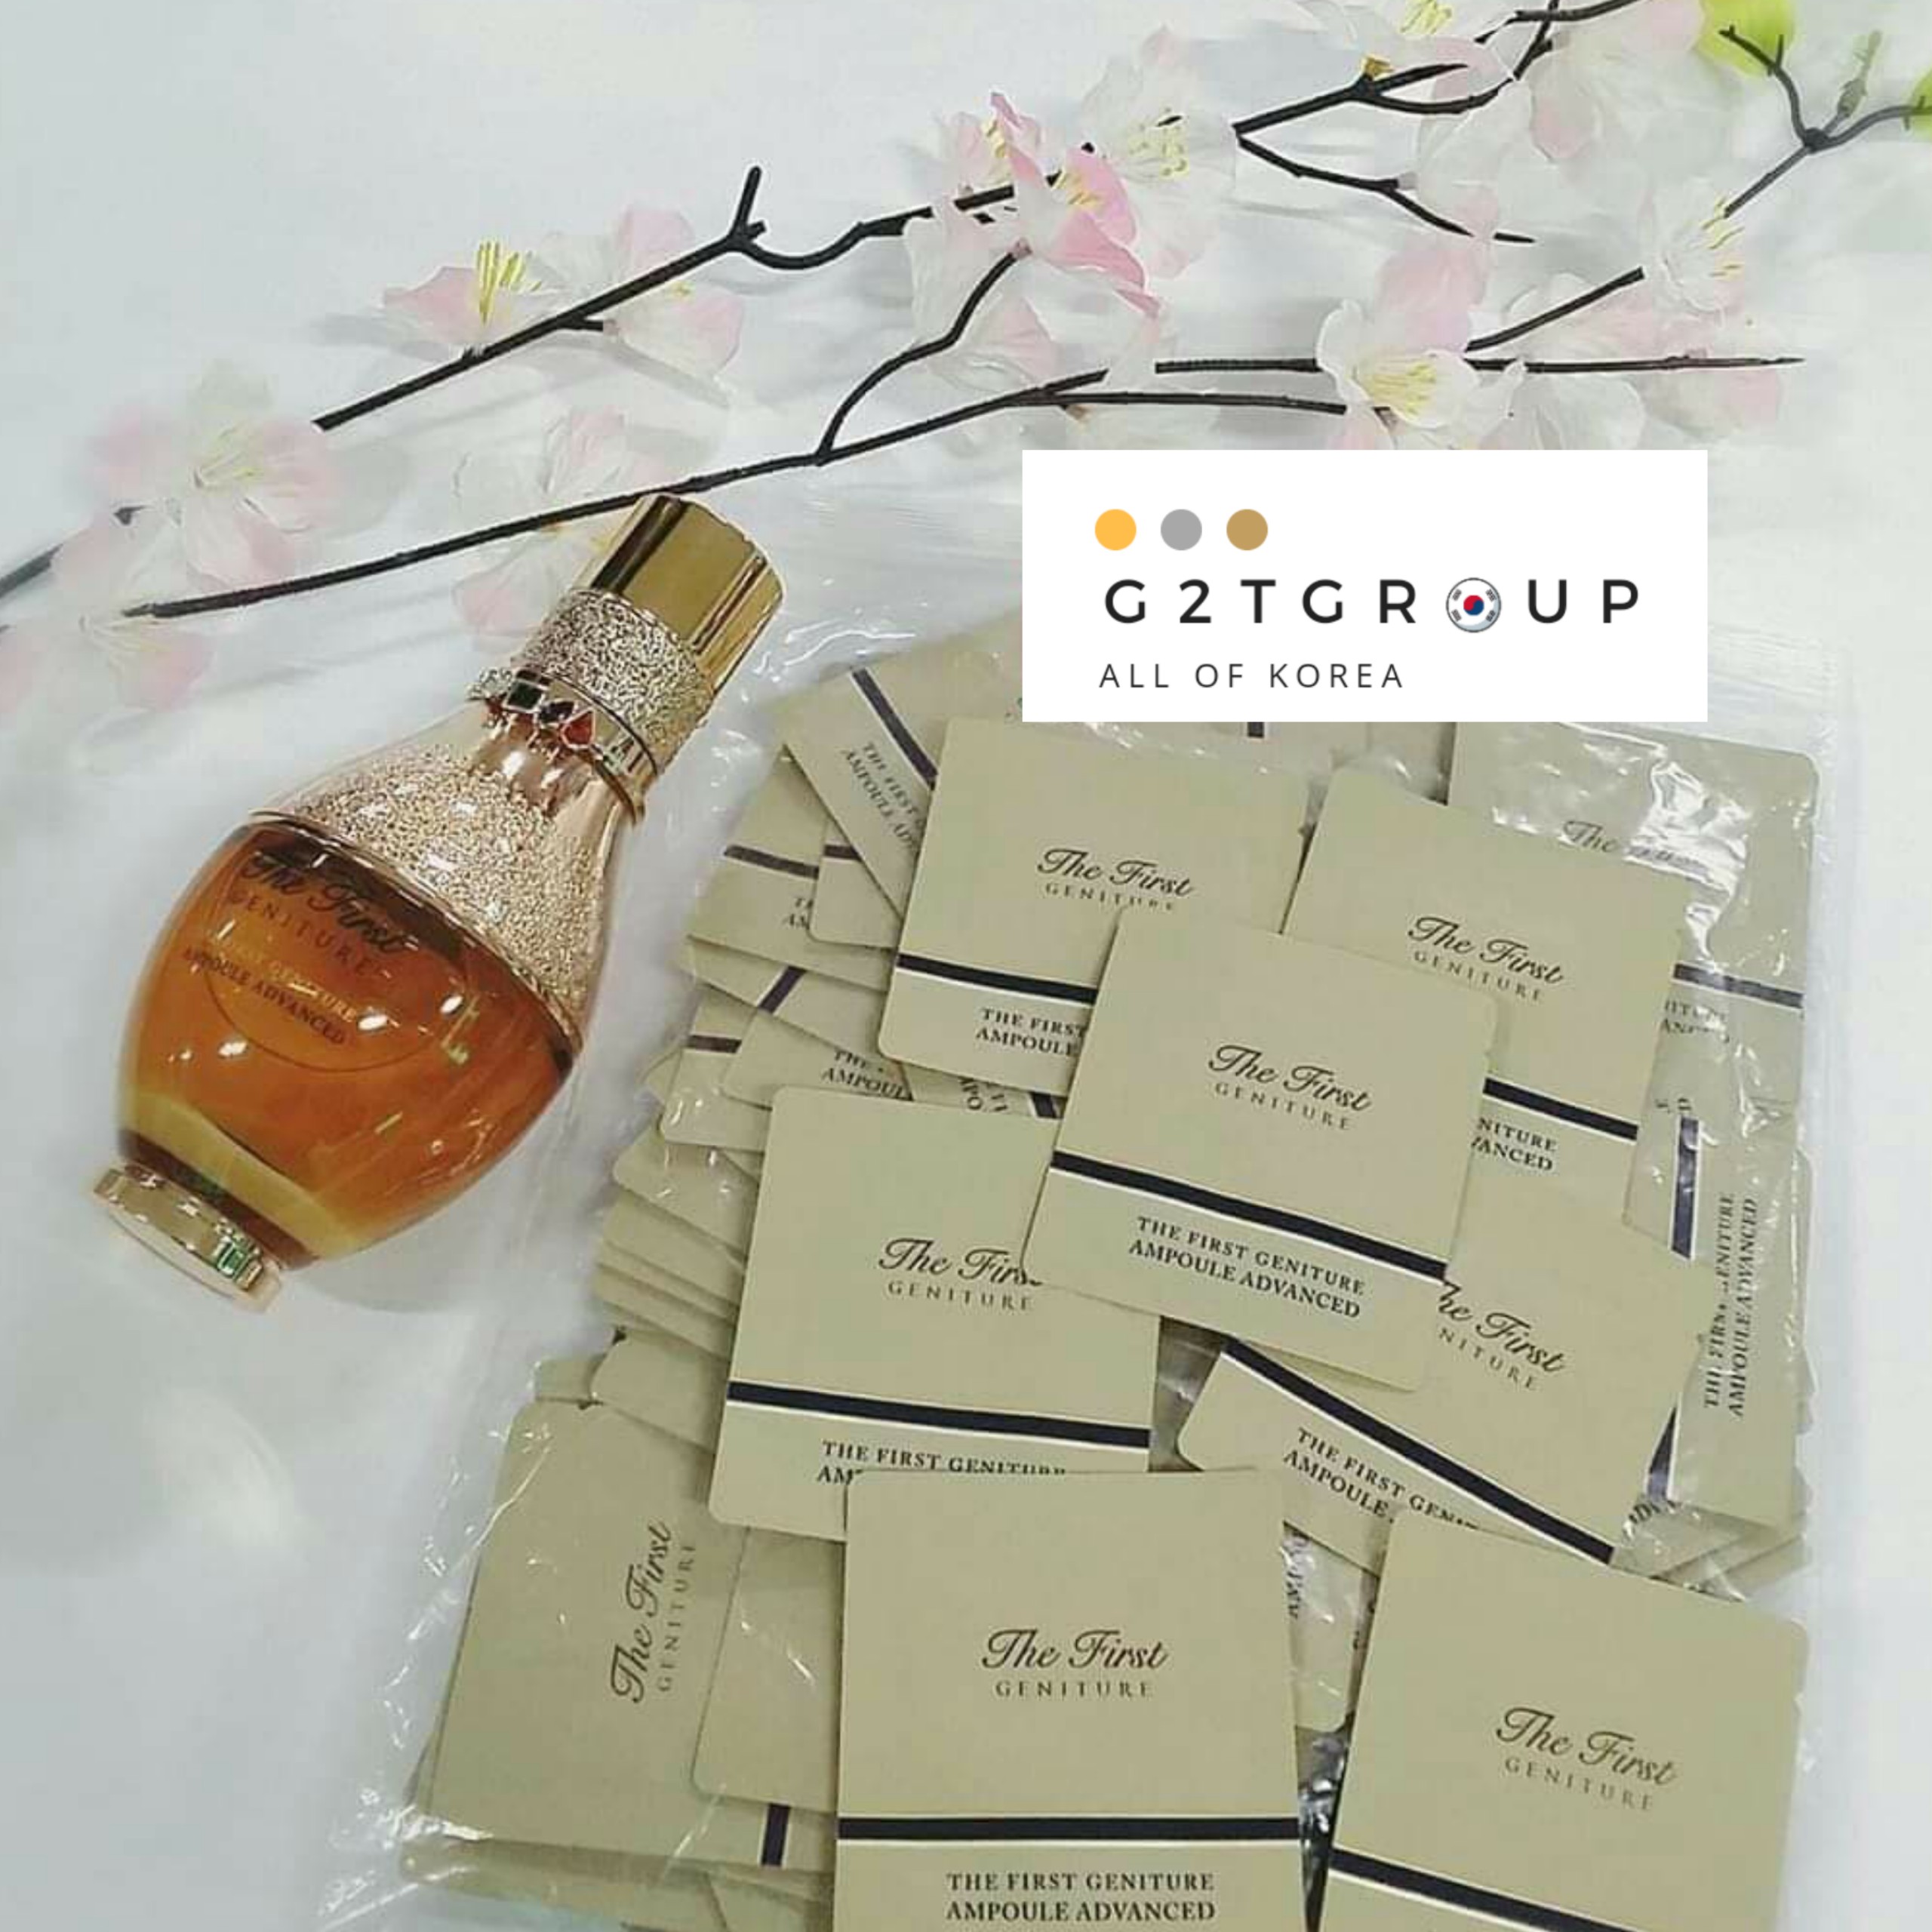 Ohui the first ampoule